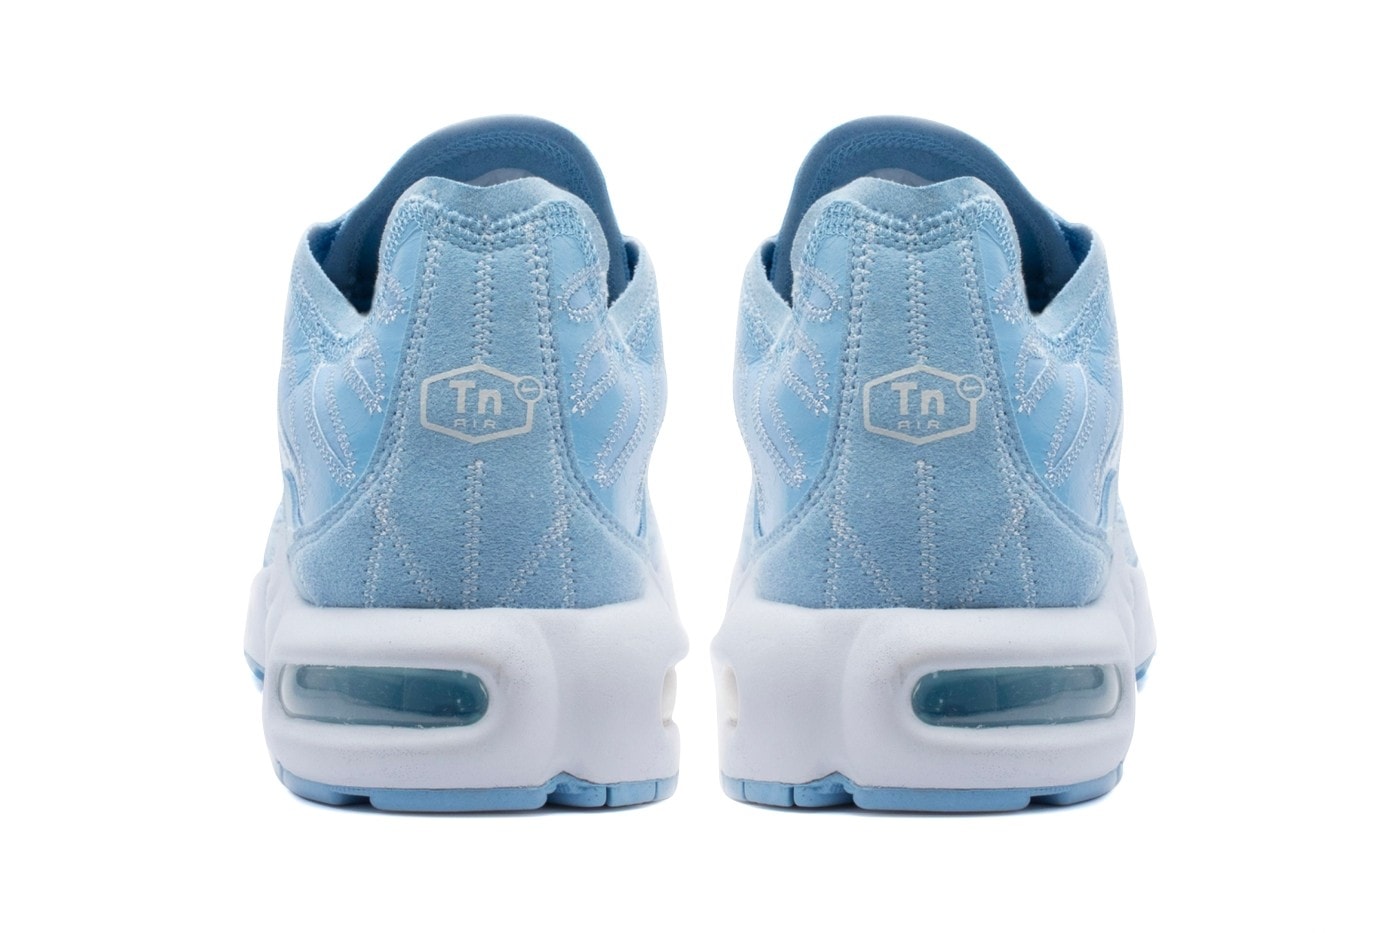 Nike Air Max Plus Deconstructed Psychic Blue